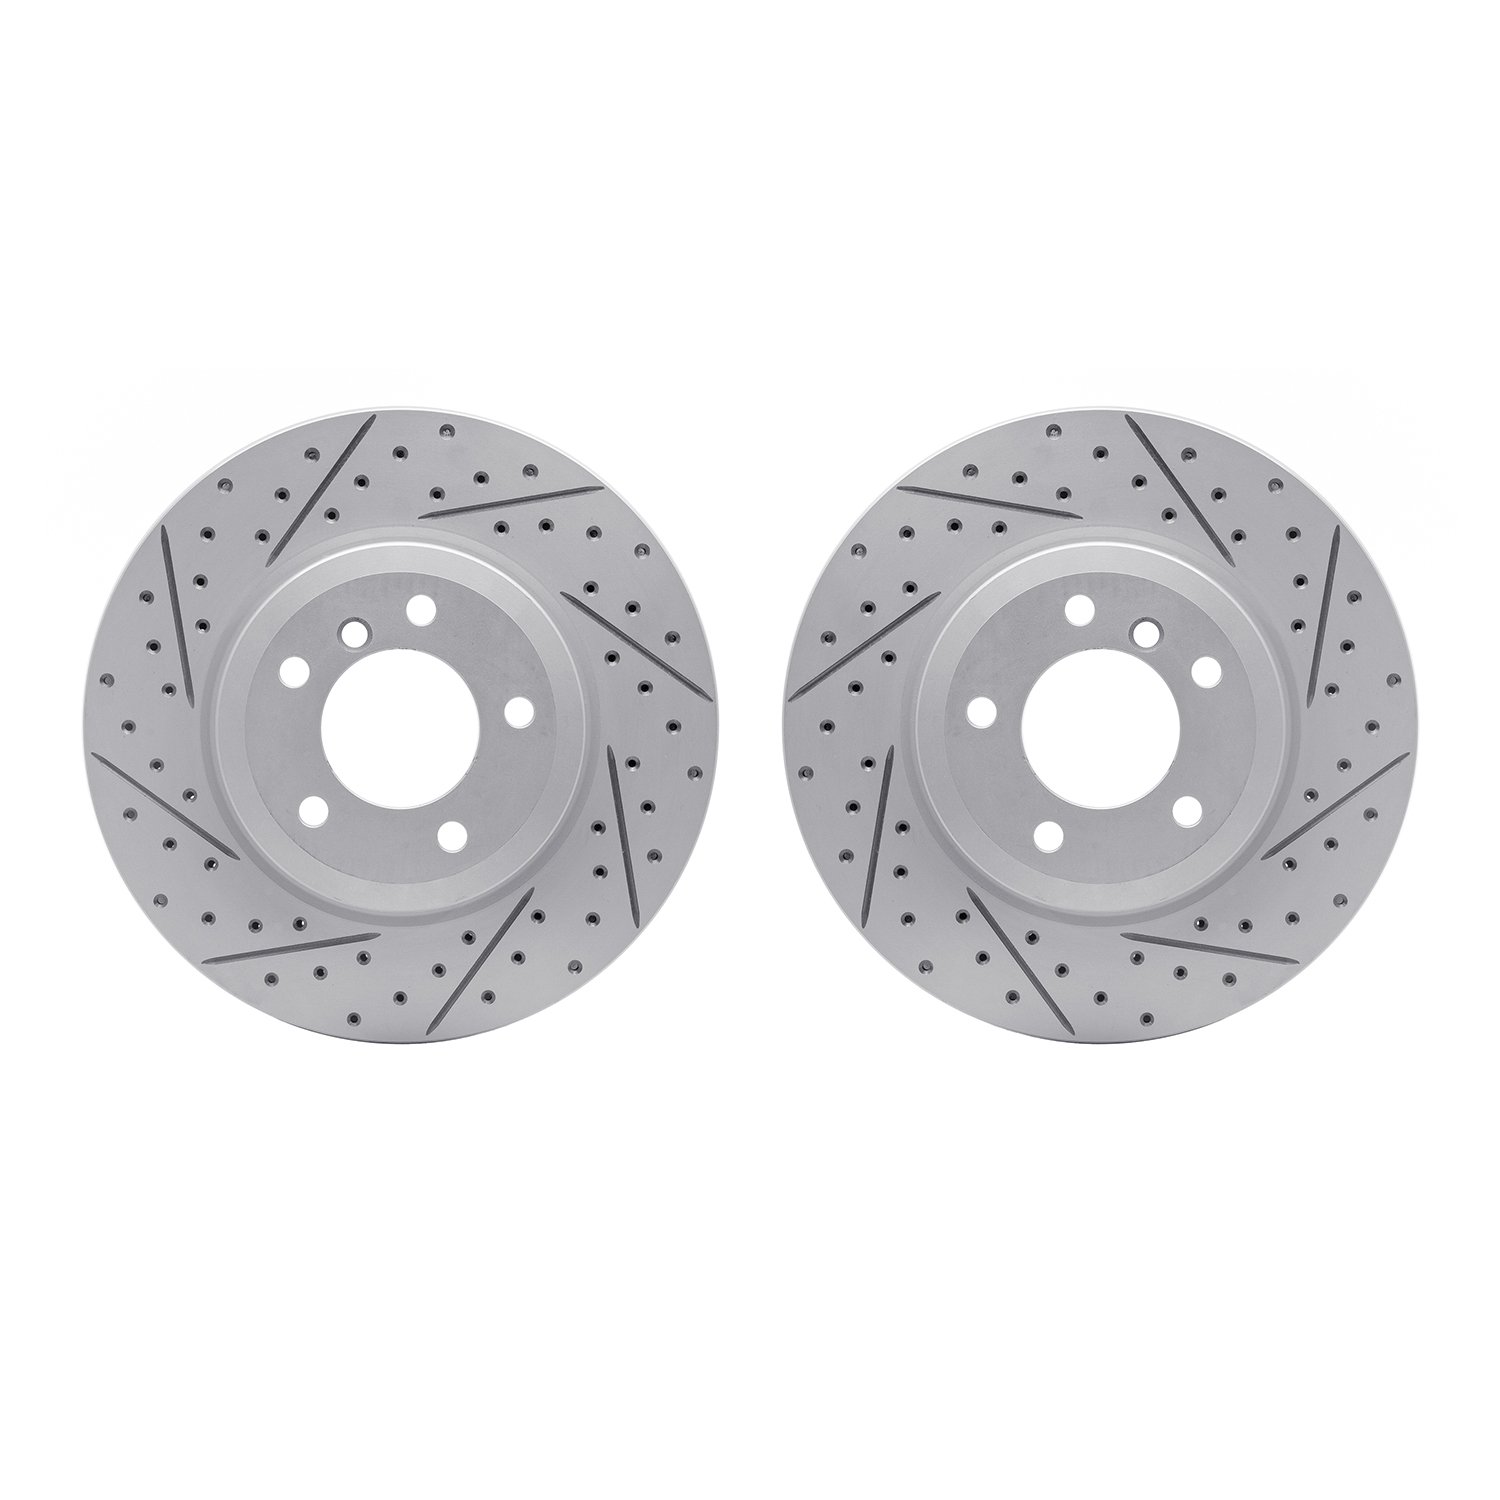 2002-31012 Geoperformance Drilled/Slotted Brake Rotors, 2001-2008 BMW, Position: Front